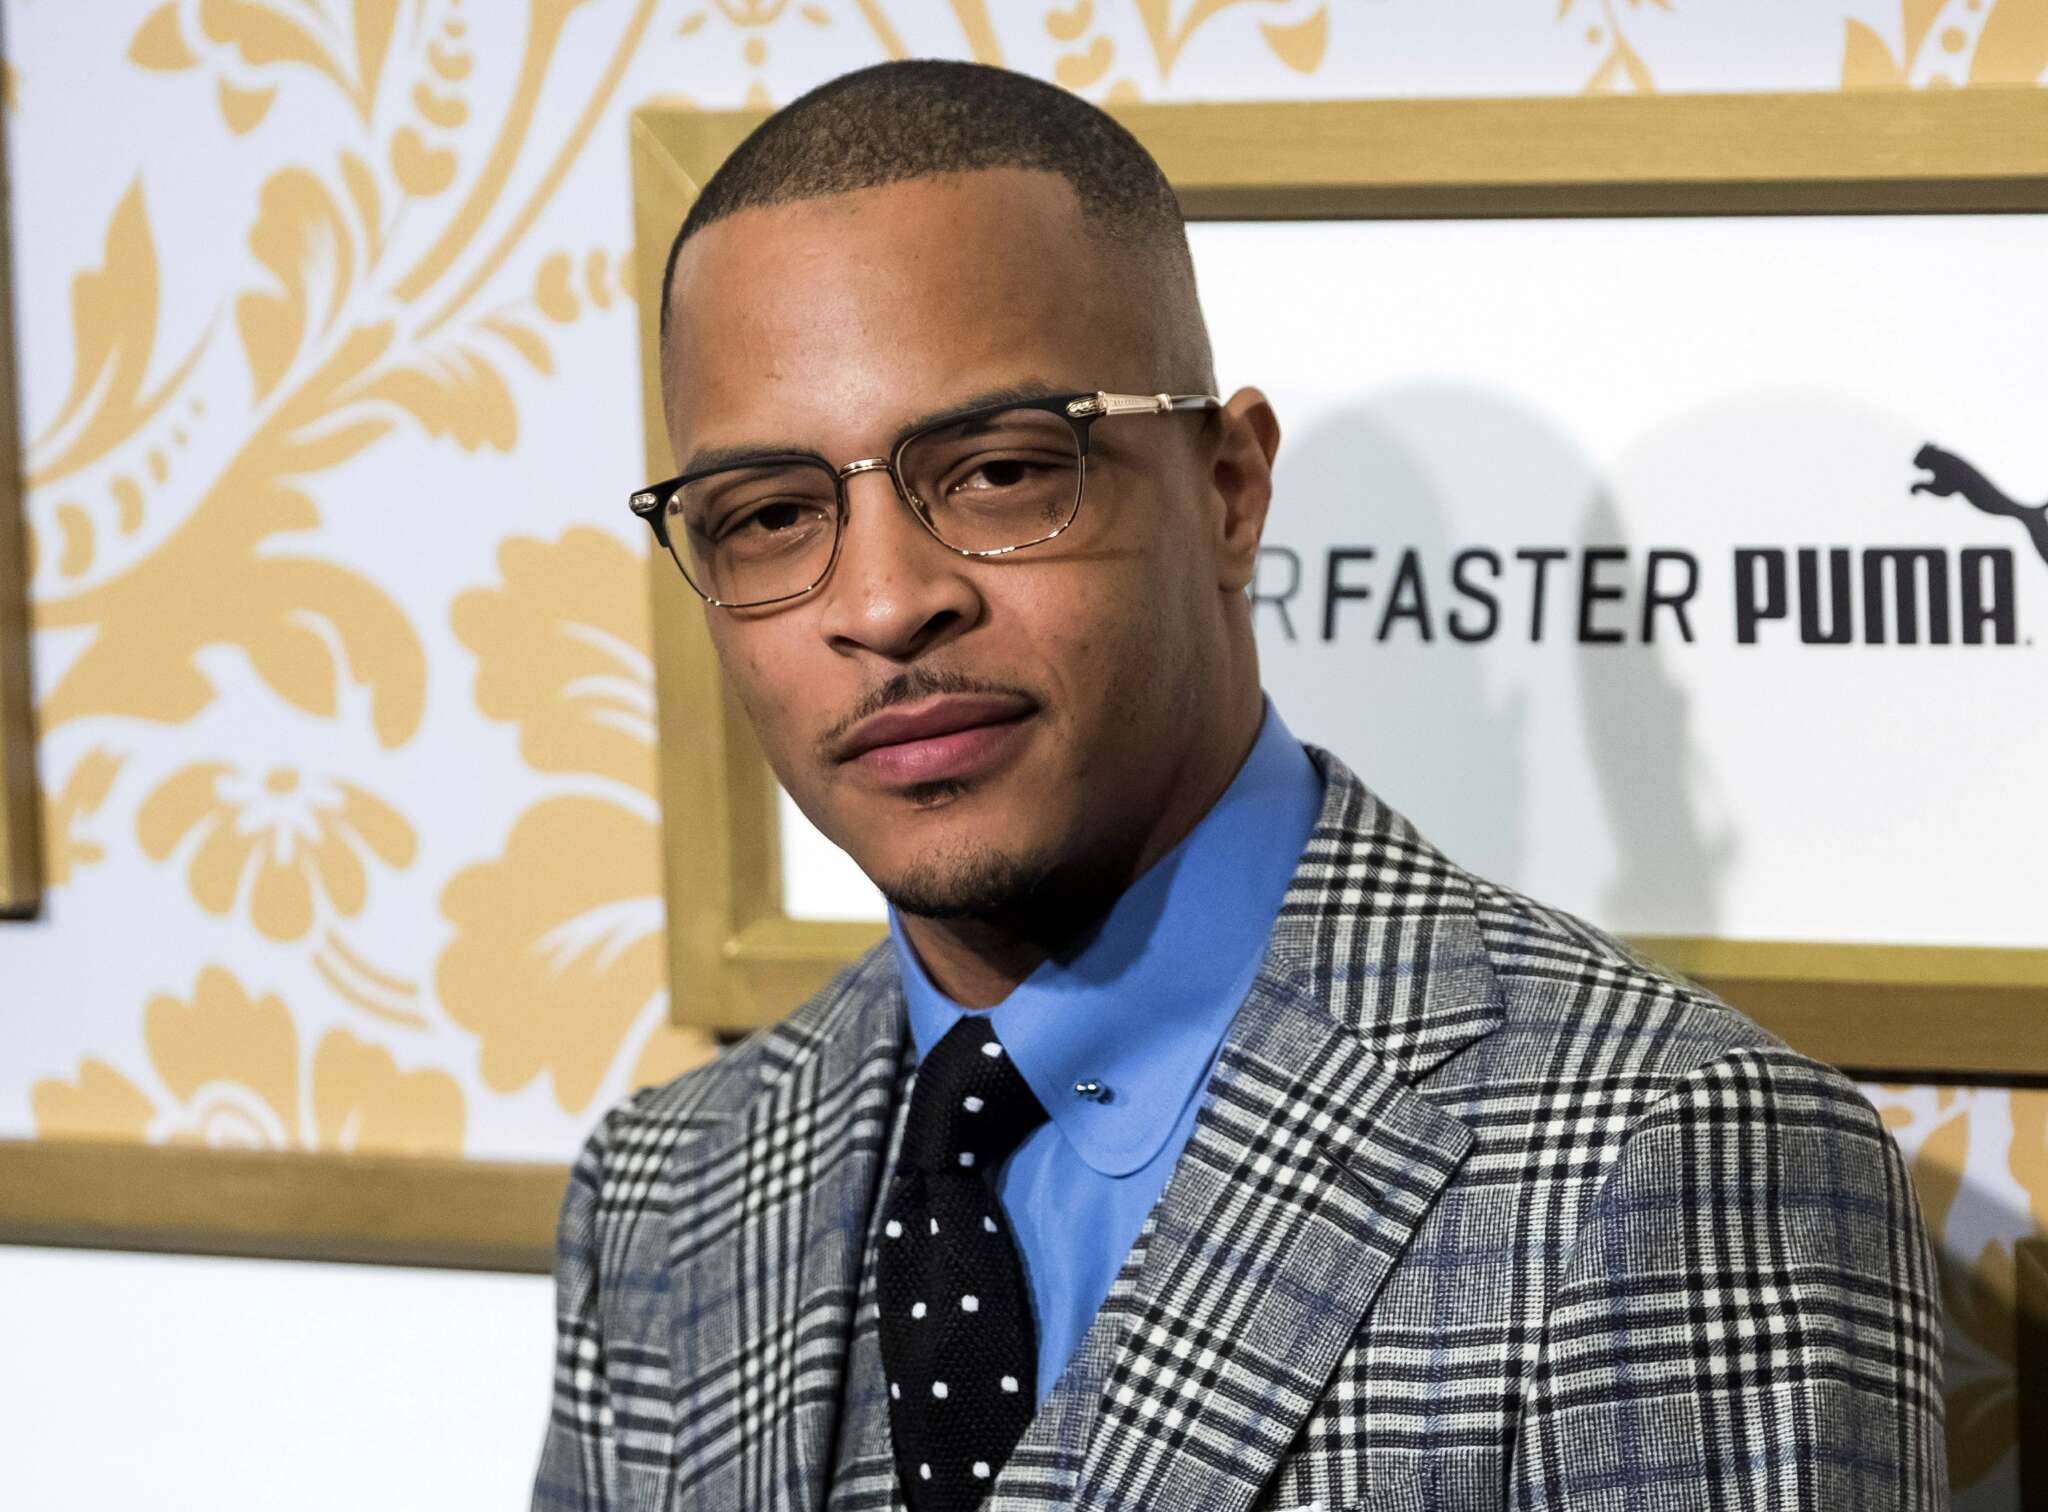 T.I. Reveals His Biggest Flex For Fans - Check Out The Message That He Posted